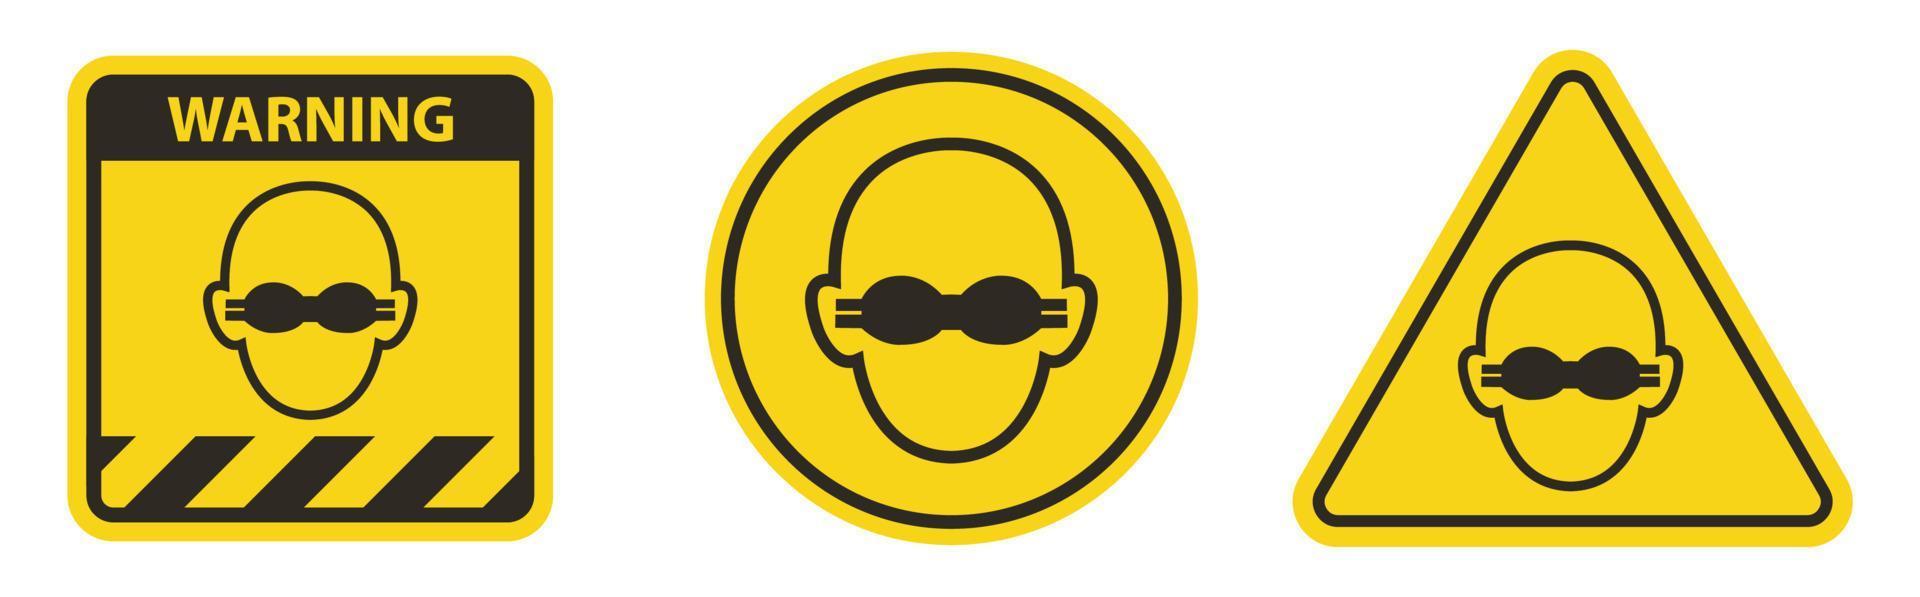 Caution Wear Opaque Eye Protection Sign Isolate On White Background vector